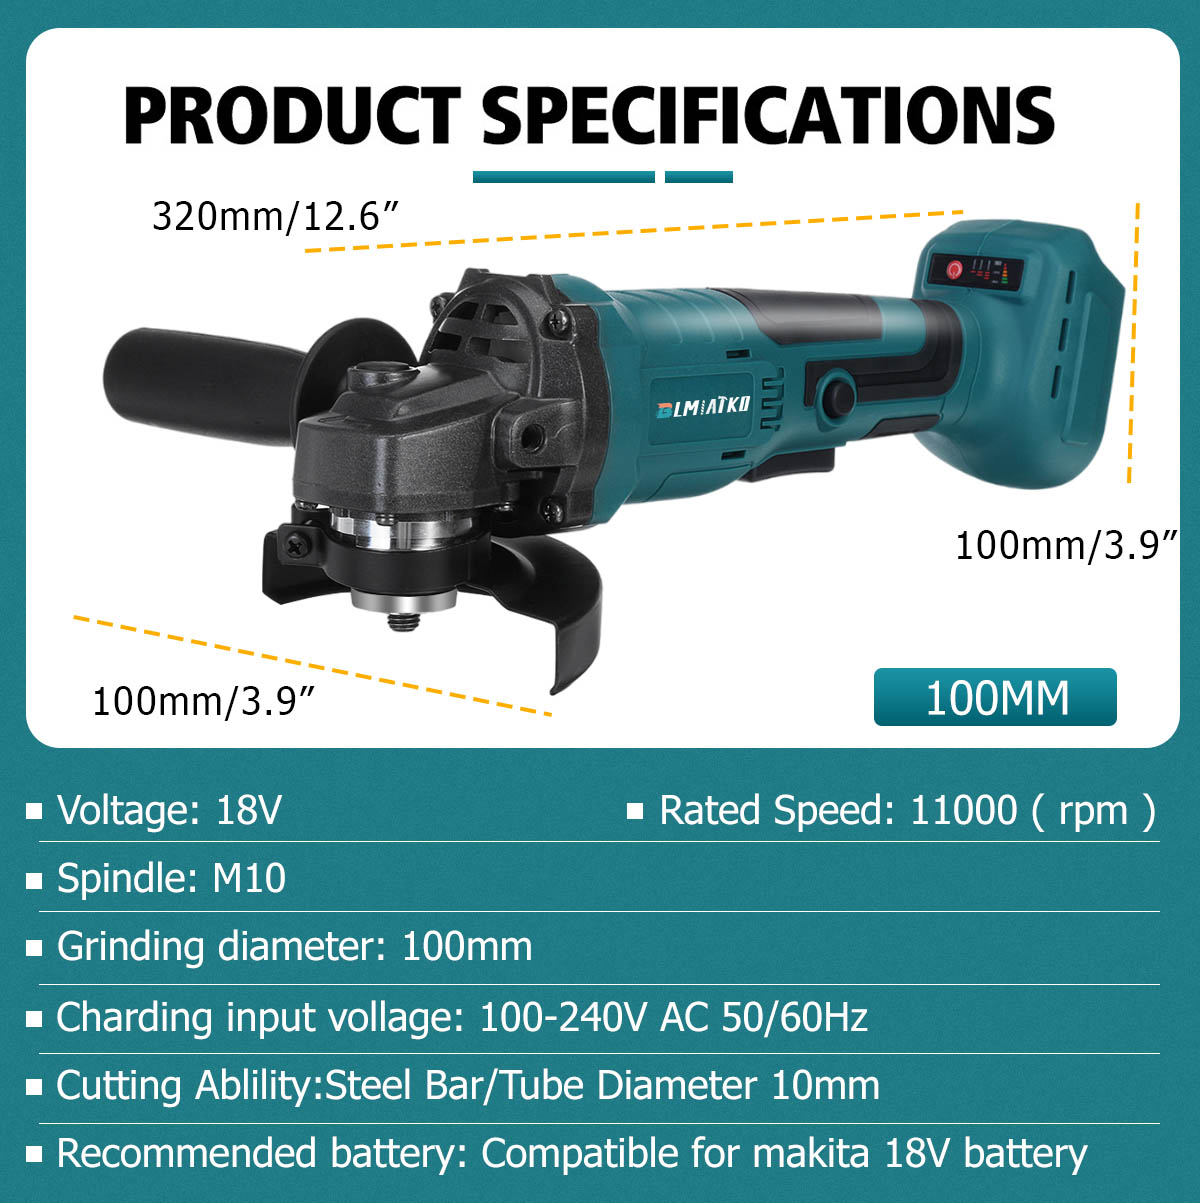 BLMIATKO-18V-800W-Lithium-Battery-Brushless-Angle-Grinder-100MM-11000RPM-Rechargeable-Polishing-Sand-1638251-8